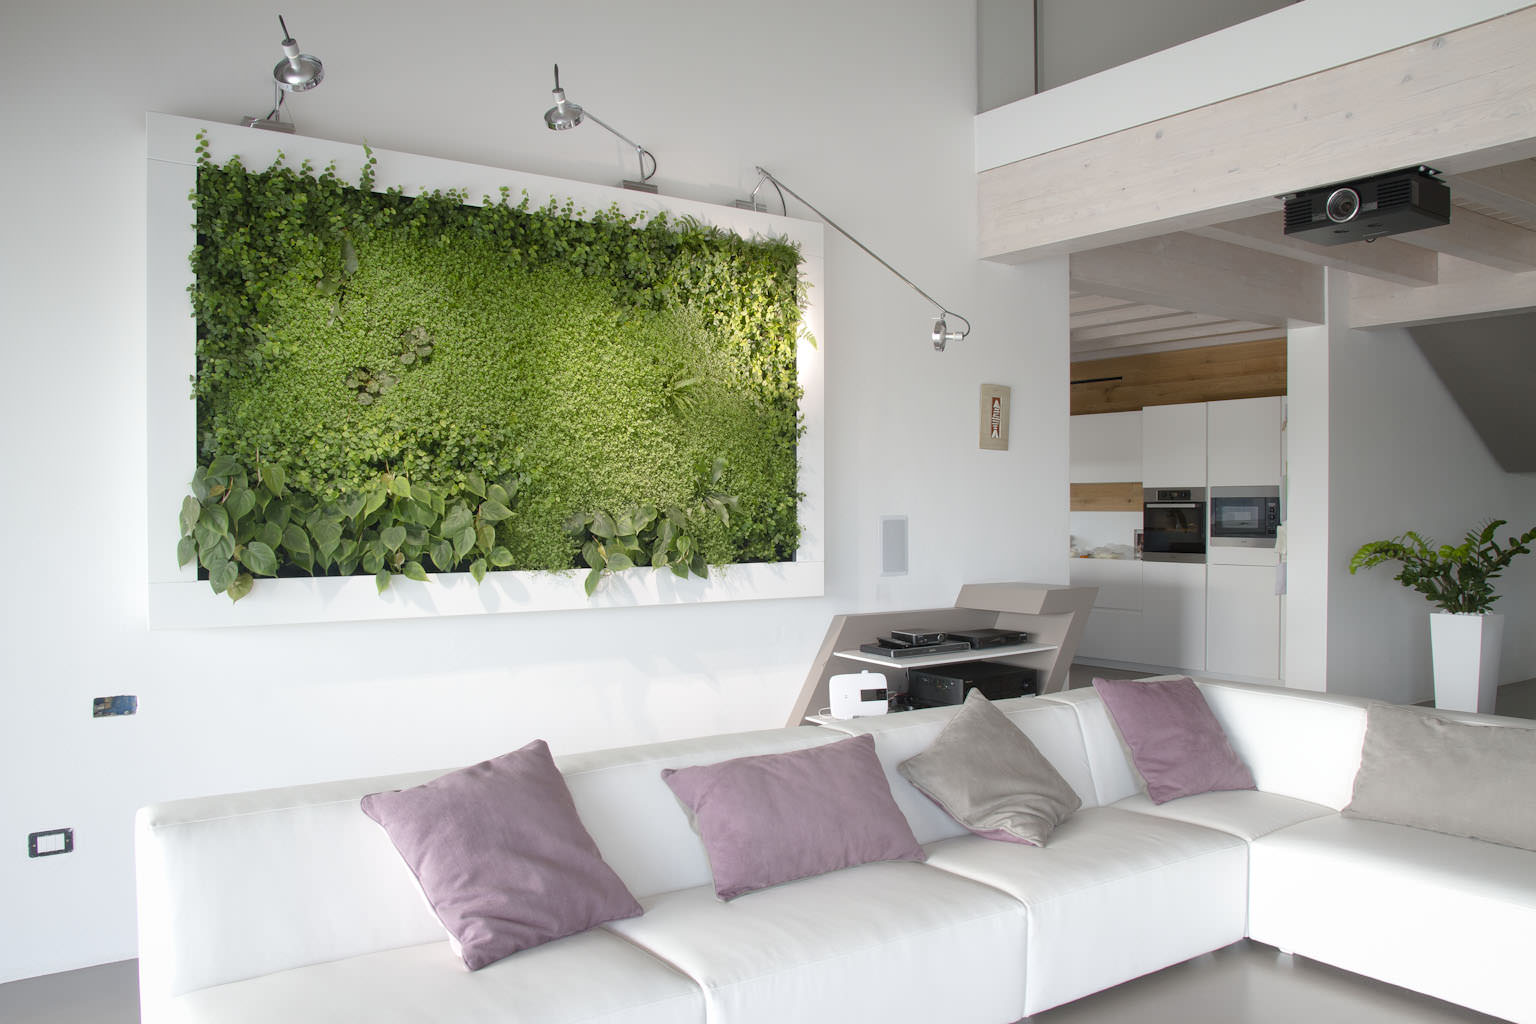 Panel of green grass on the wall of a room in a studio apartment